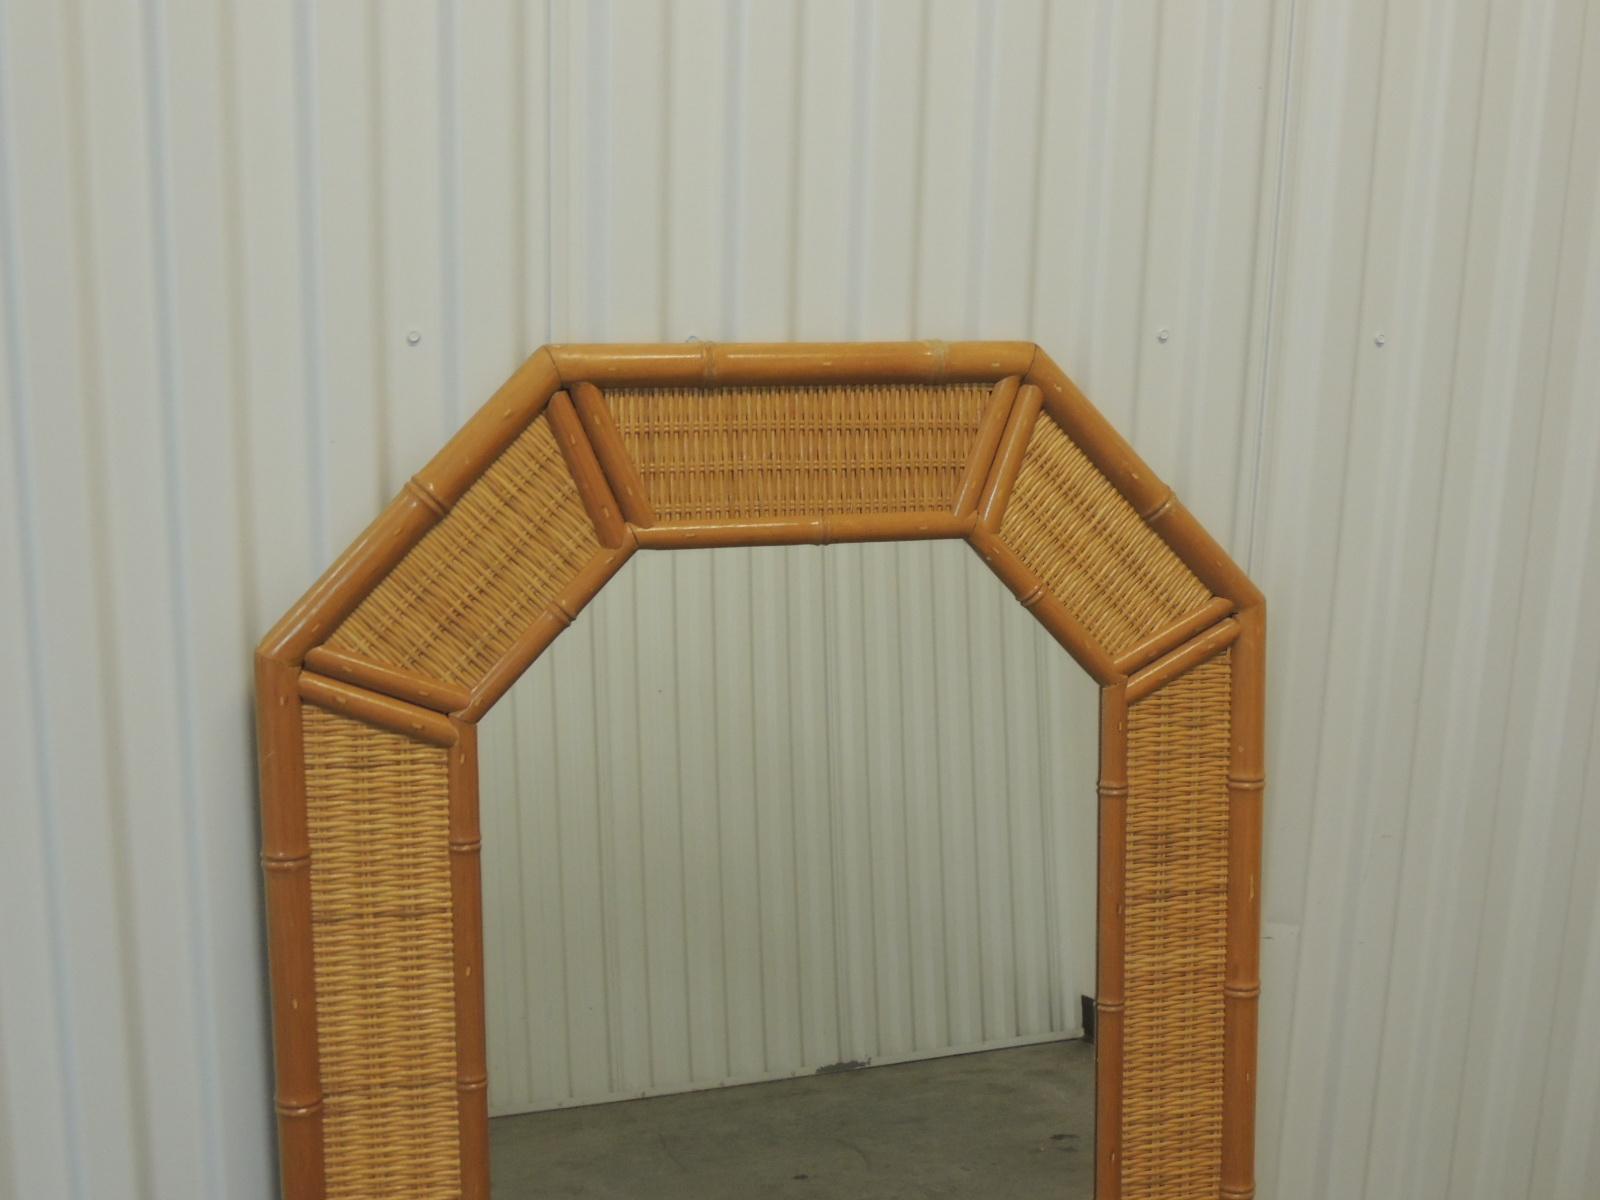 Vintage tall octagonal shape bamboo mirror,
with woven rattan inset panels. Wooden back
and hanging wire.
Measures: 27 x 48 x 1.5